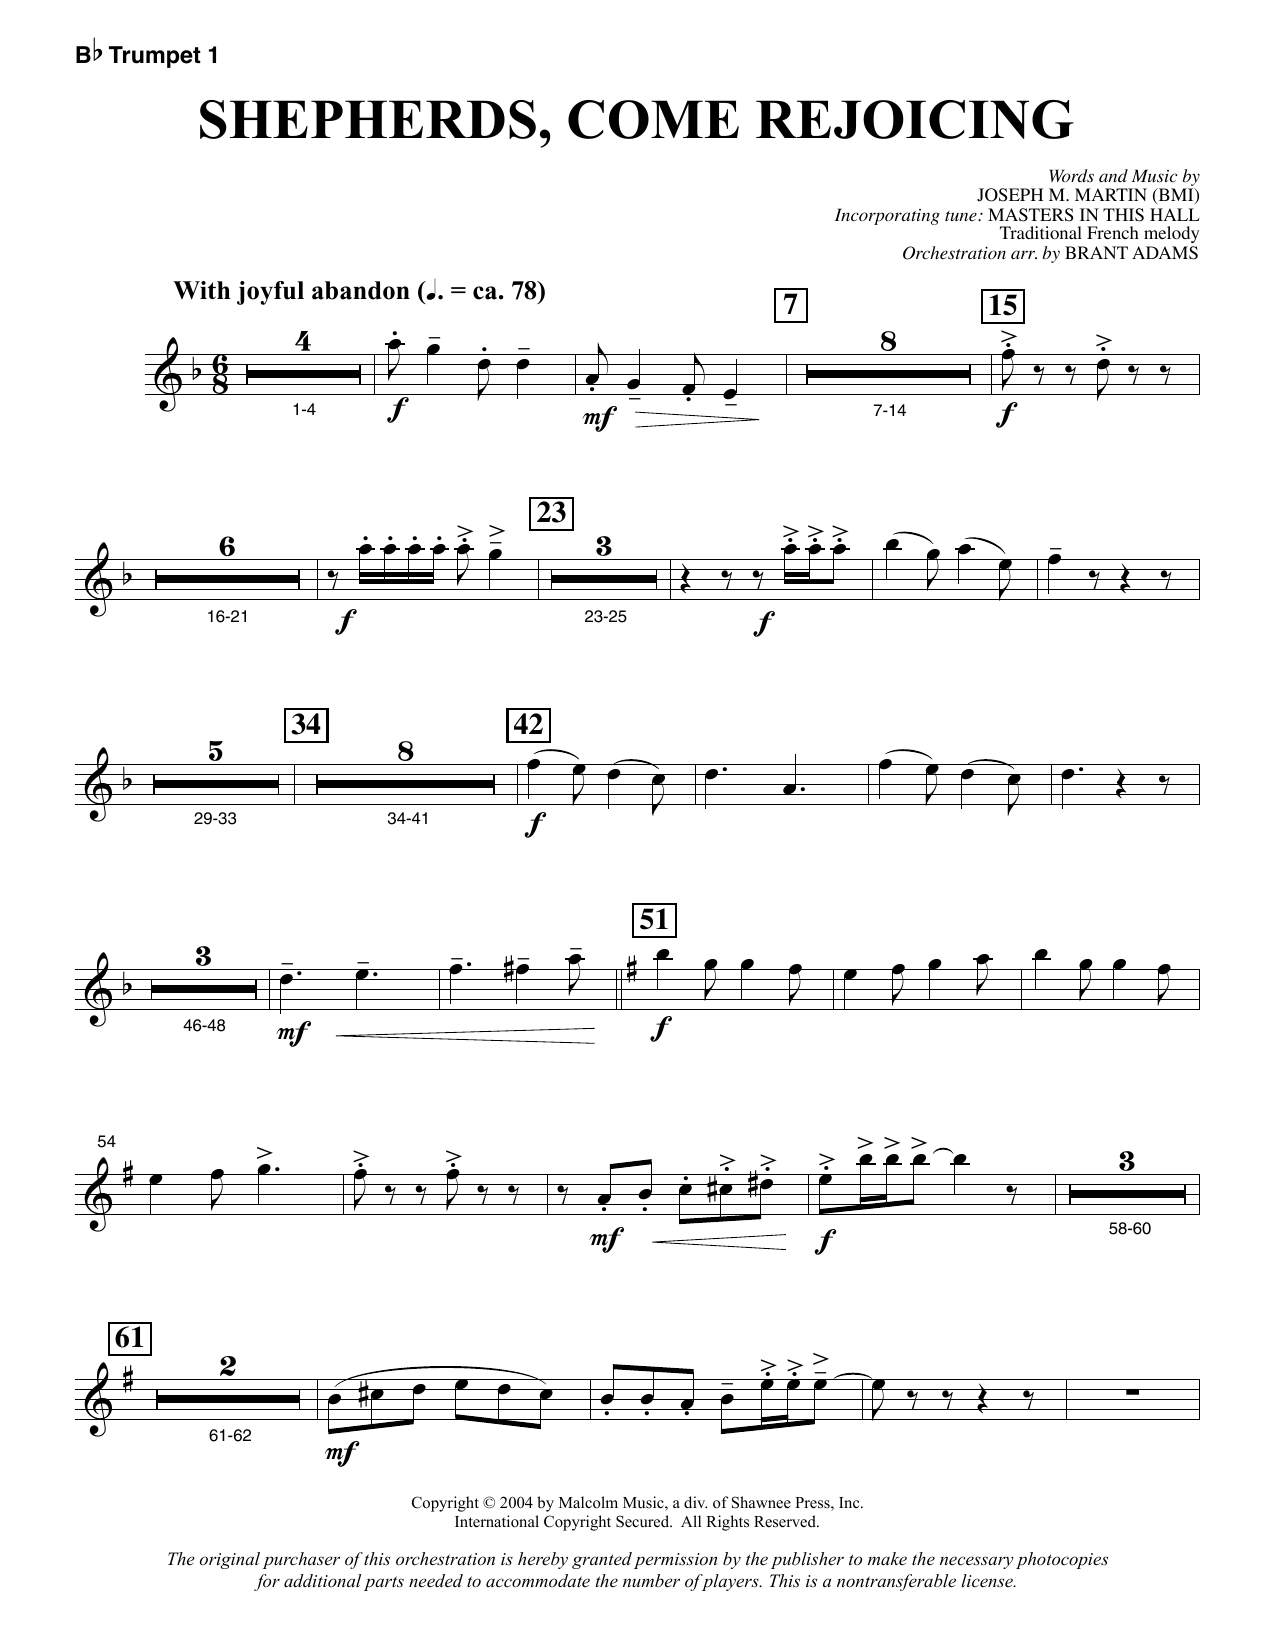 Joseph M. Martin Shepherds, Come Rejoicing (from Voices Of Christmas) - Bb Trumpet 1 sheet music notes and chords. Download Printable PDF.